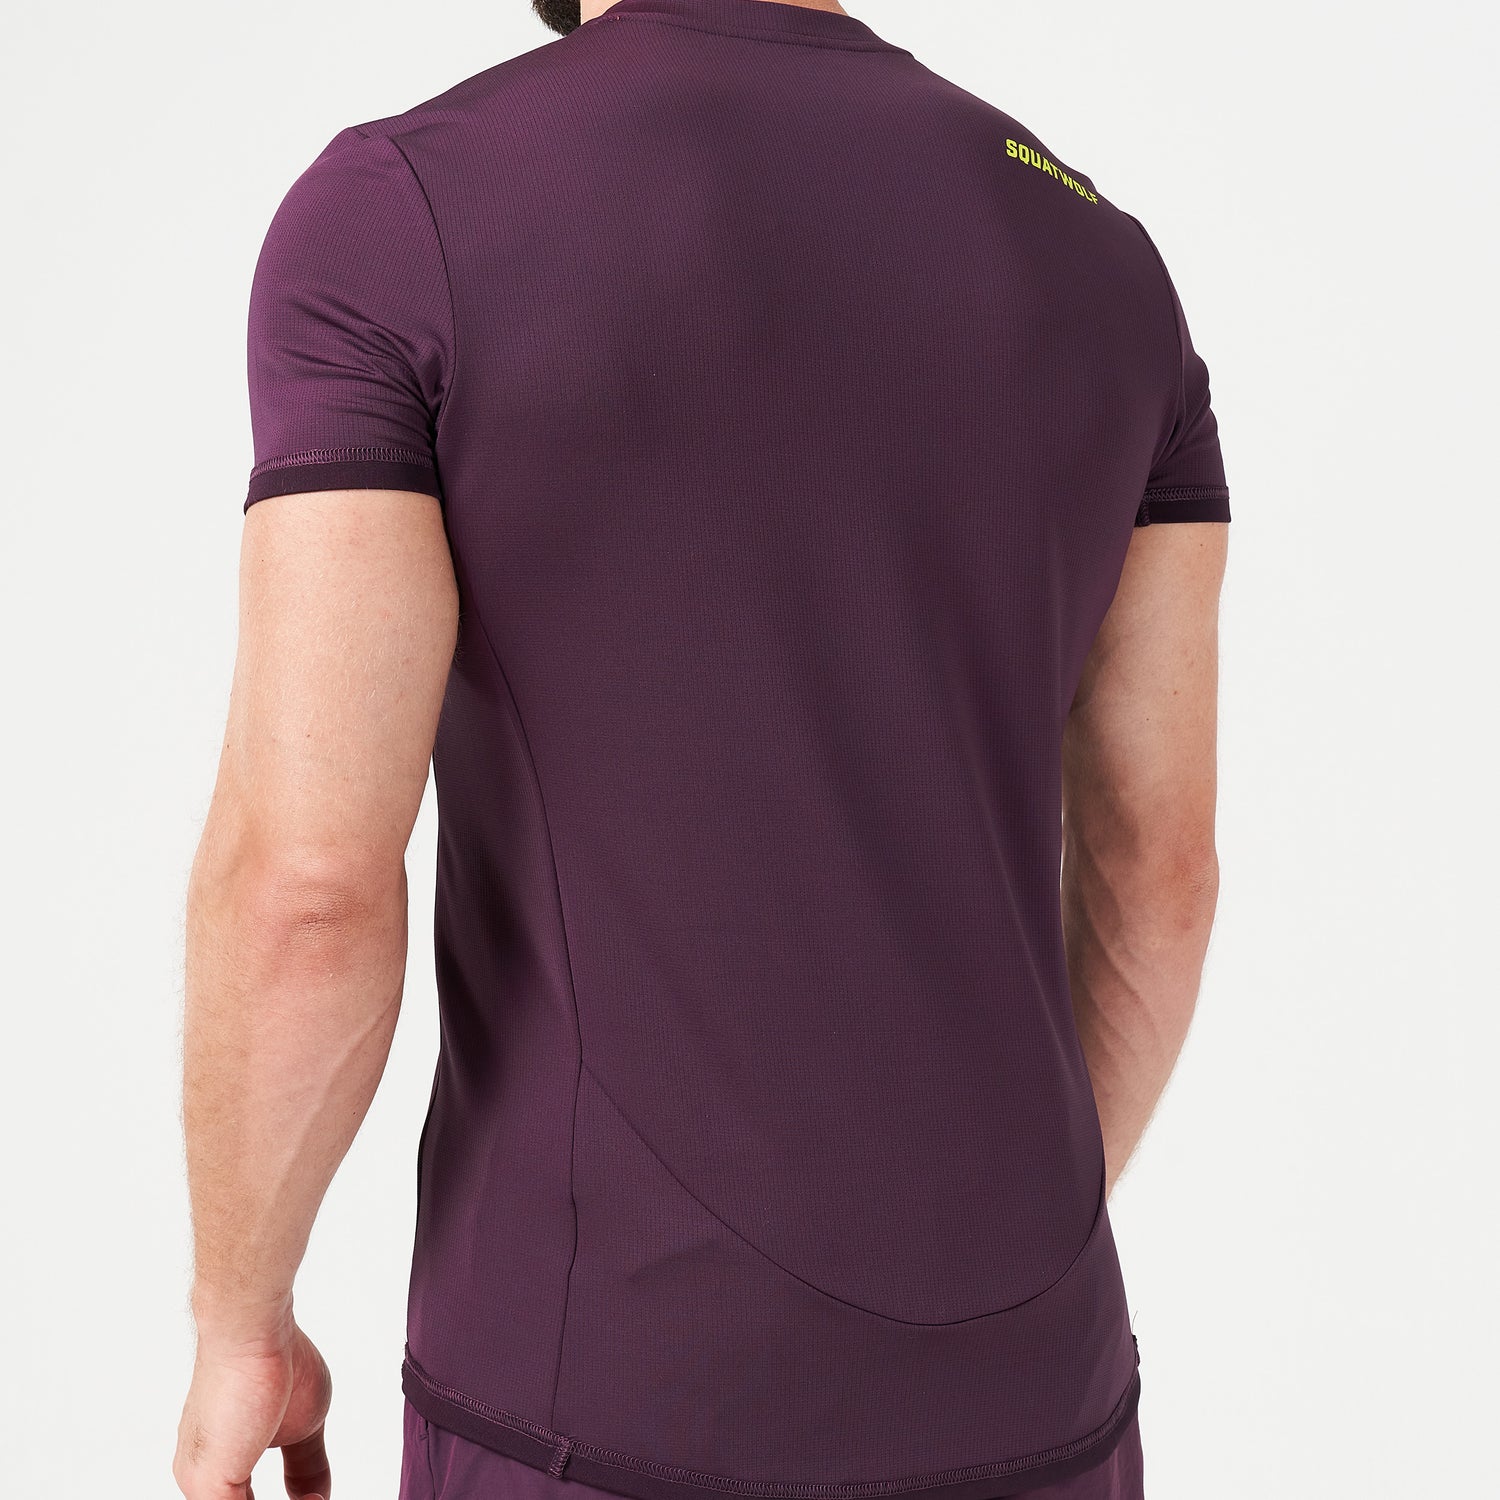 squatwolf-gym-wear-lab360-tdry-tee-plum-perfect-workout-shirts-for-men